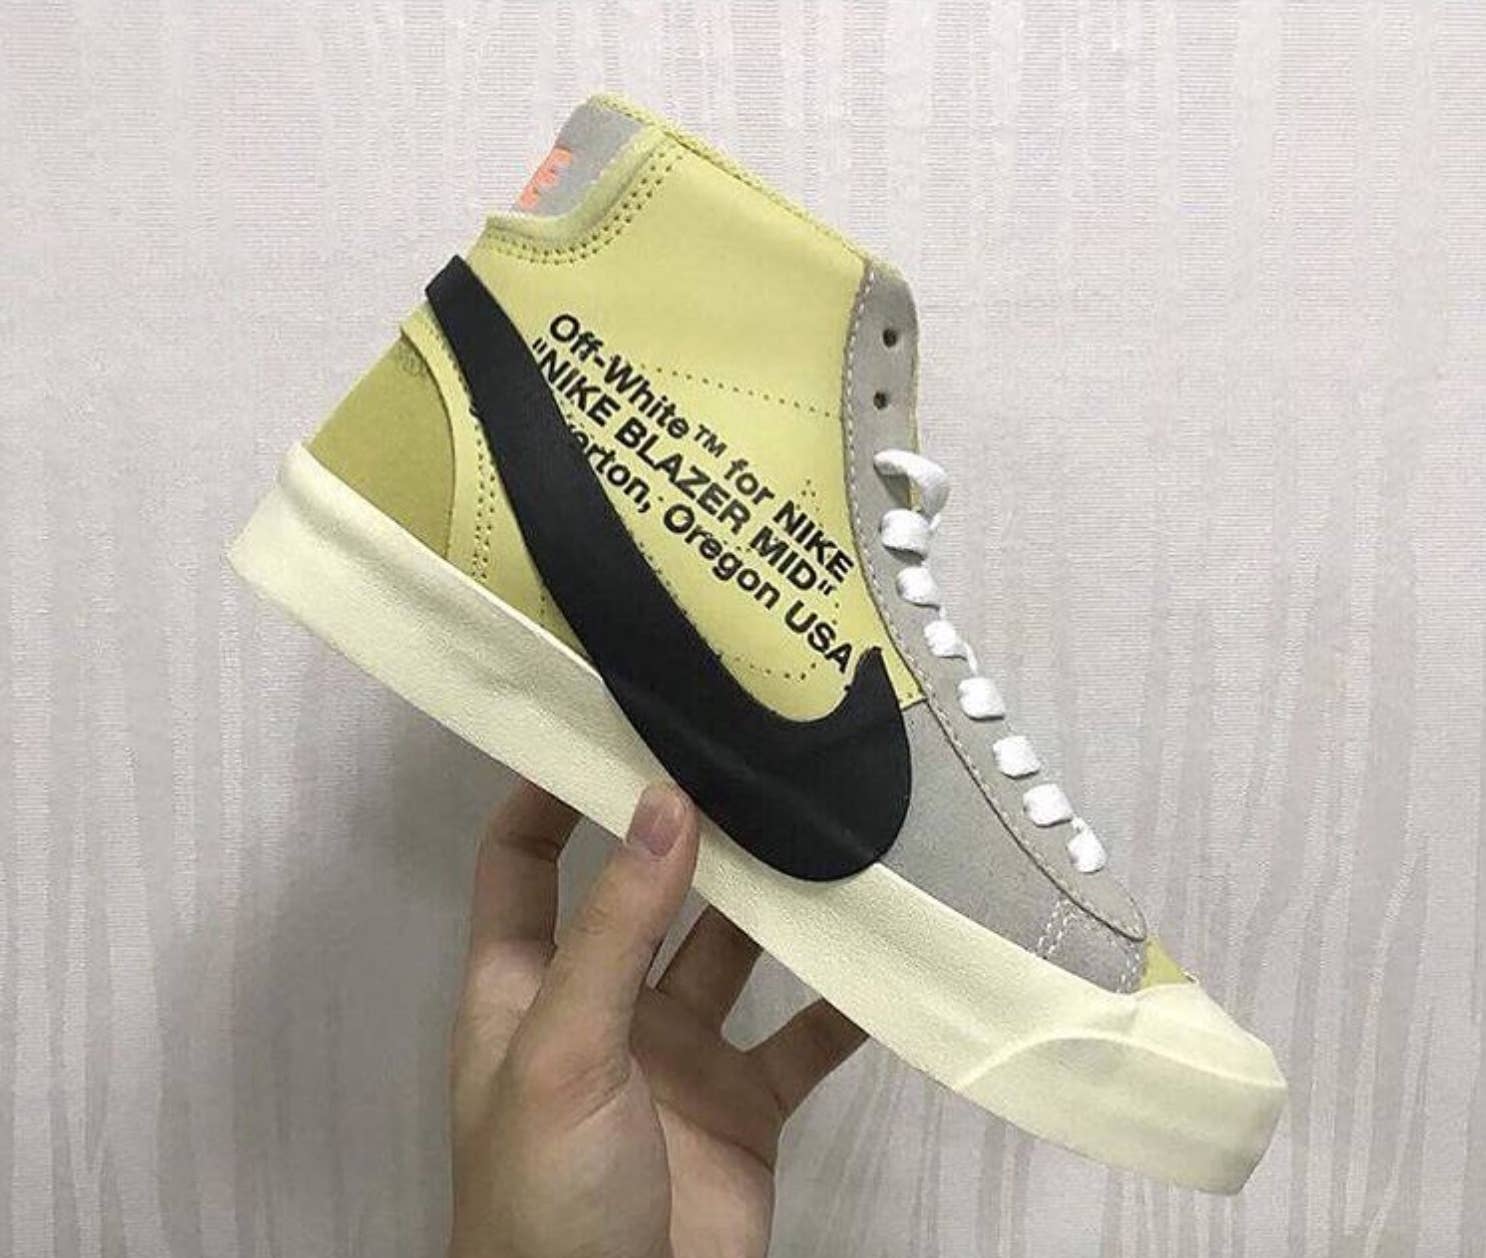 New Images of the Upcoming Off-White x Nike Blazer Mid